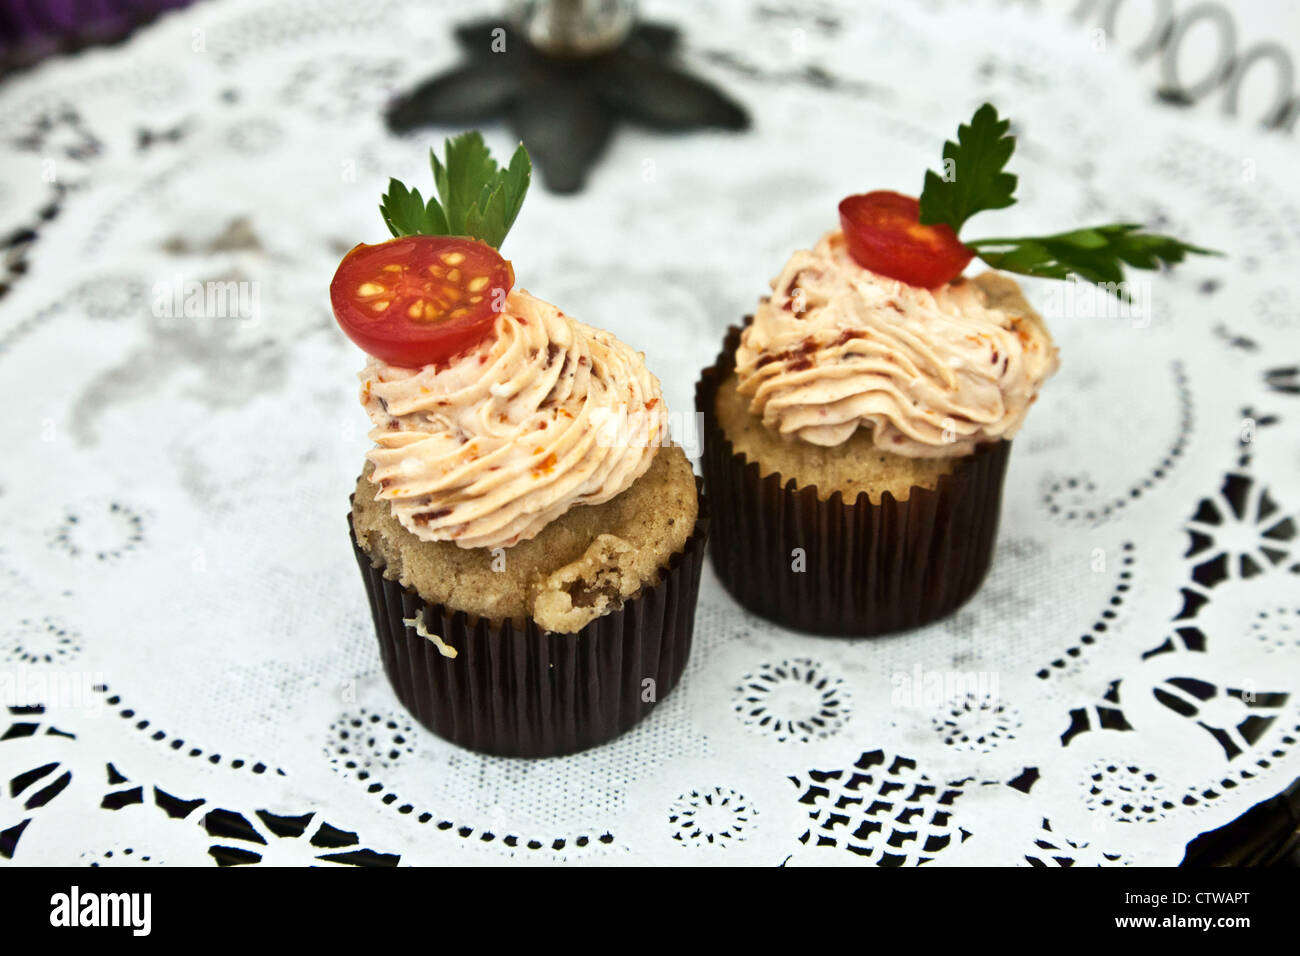 charming delicious mini cupcakes topped with strawberry whipped cream cherry tomato & a leaf displayed on paper doily Edmonds Stock Photo